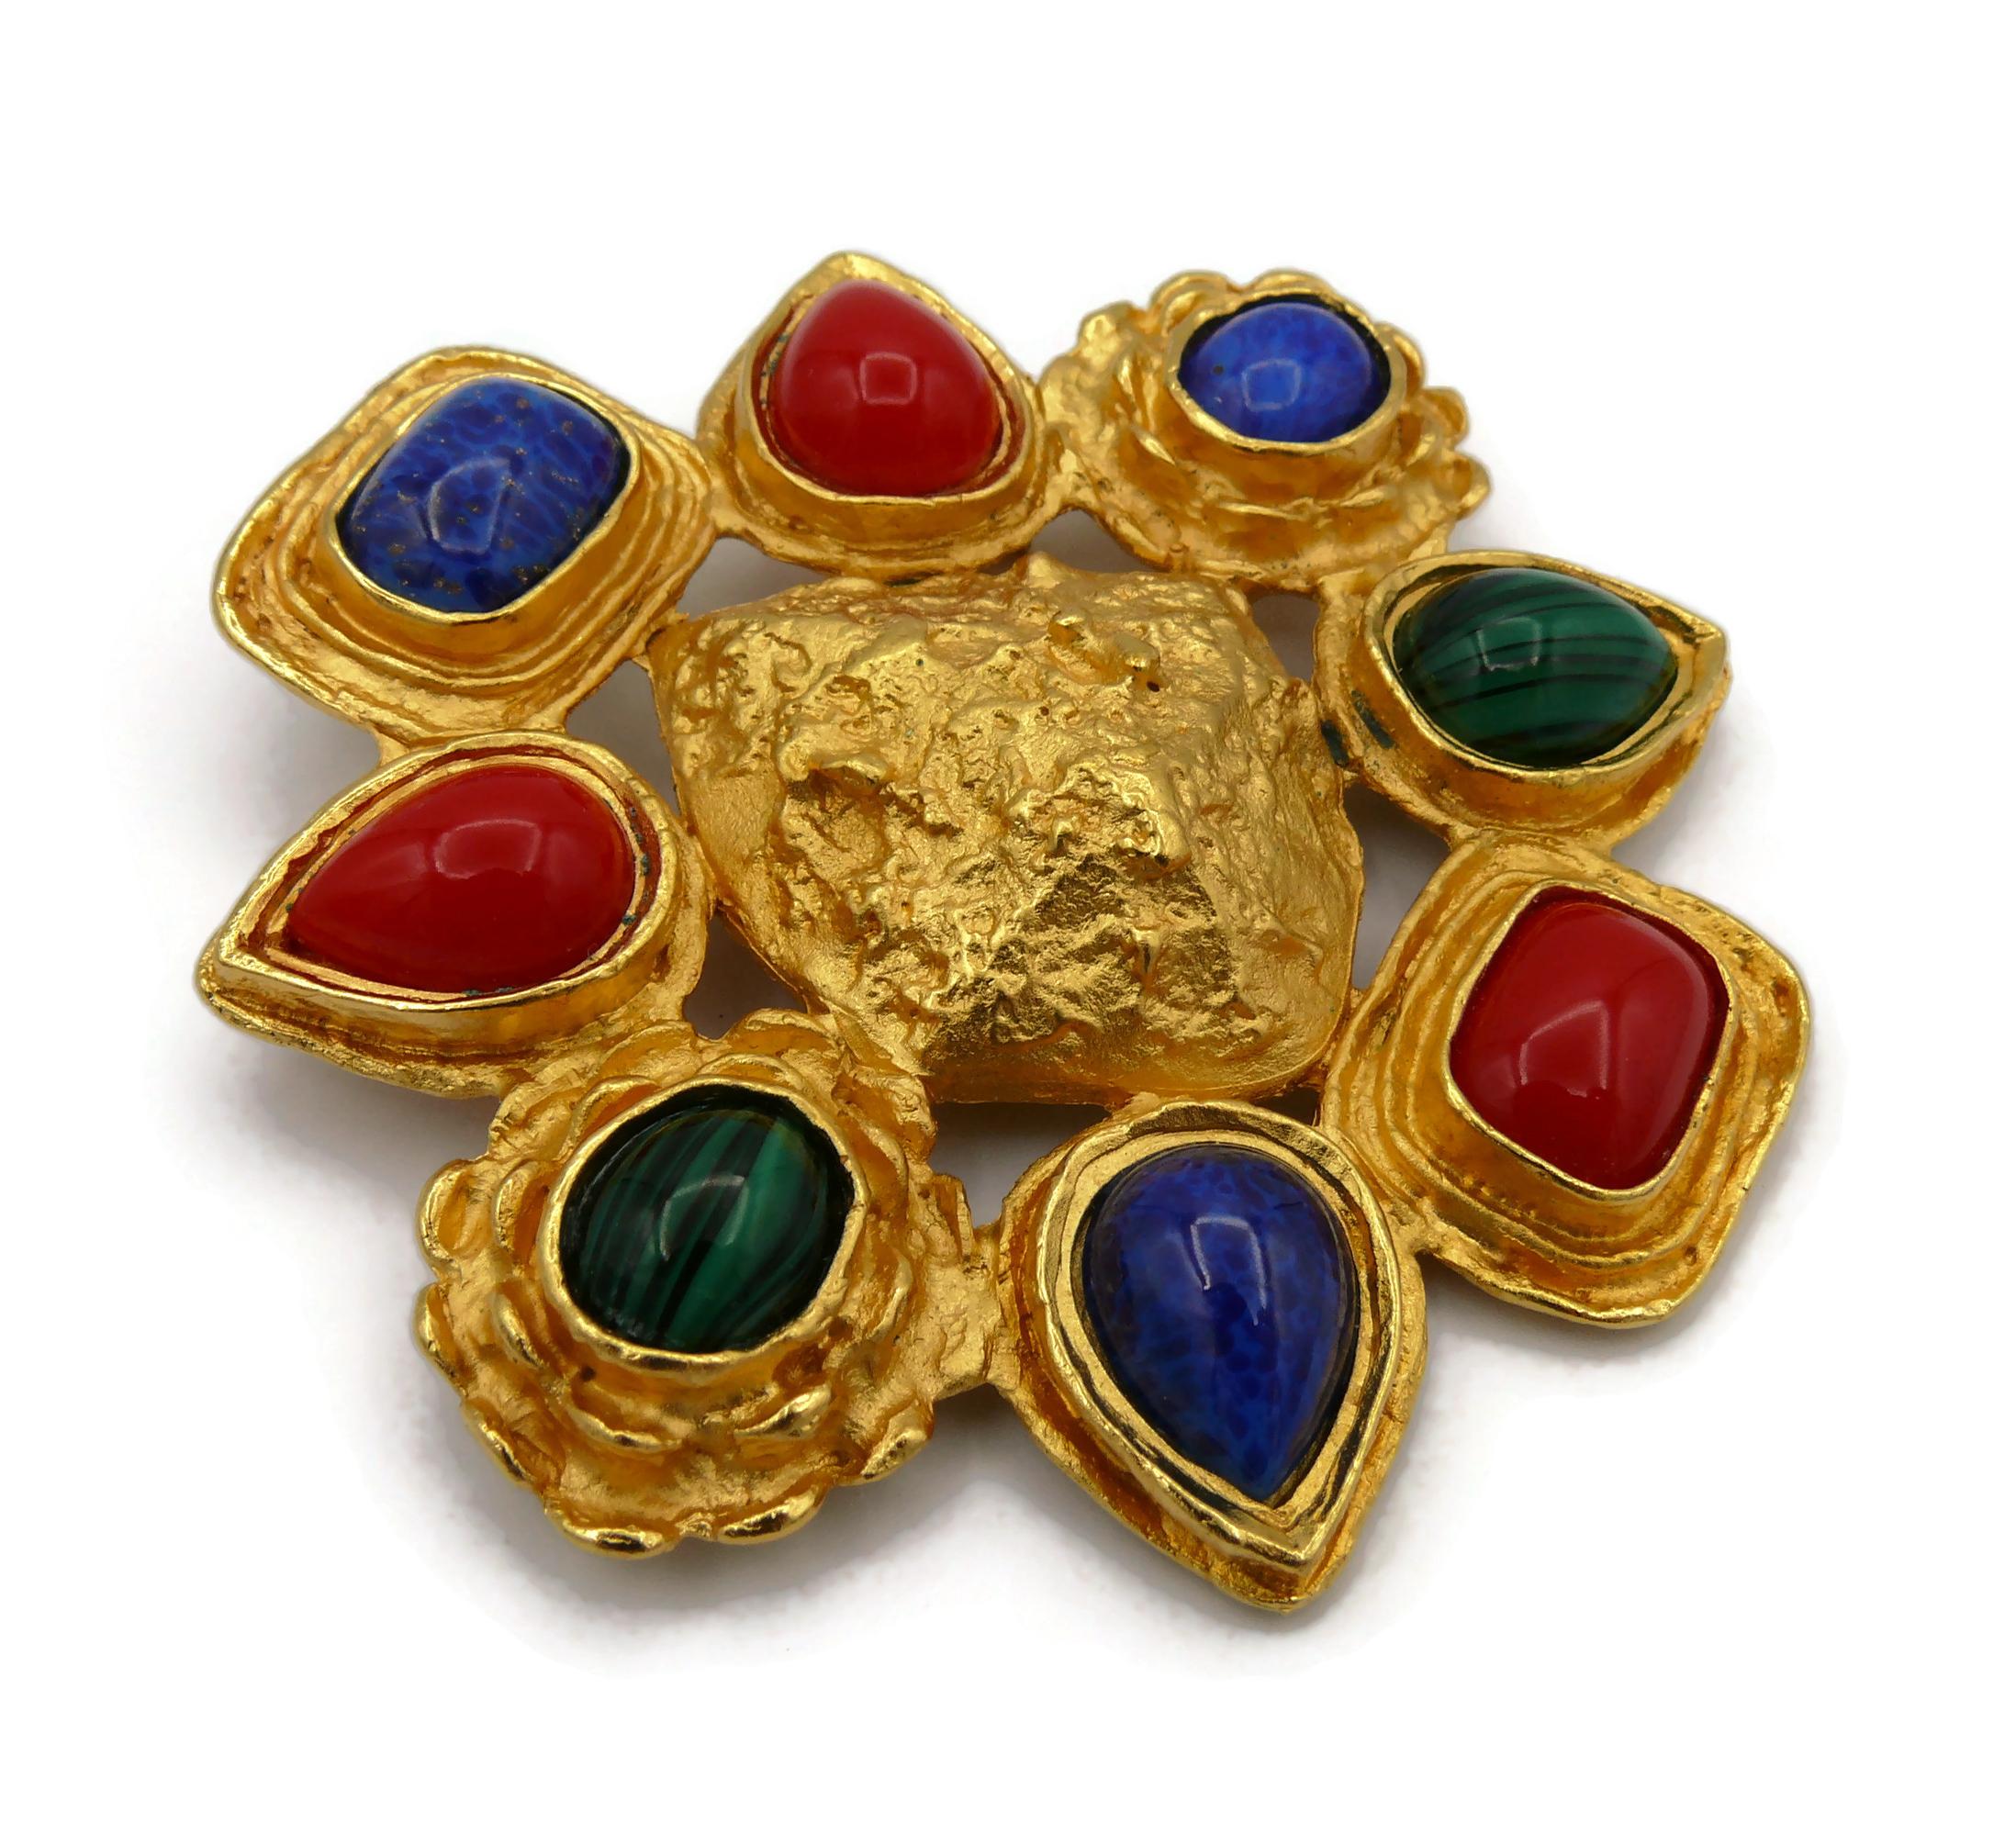 CHRISTIAN LACROIX Vintage Massive Gold Tone and Faux Gemstones Brooch For Sale 4